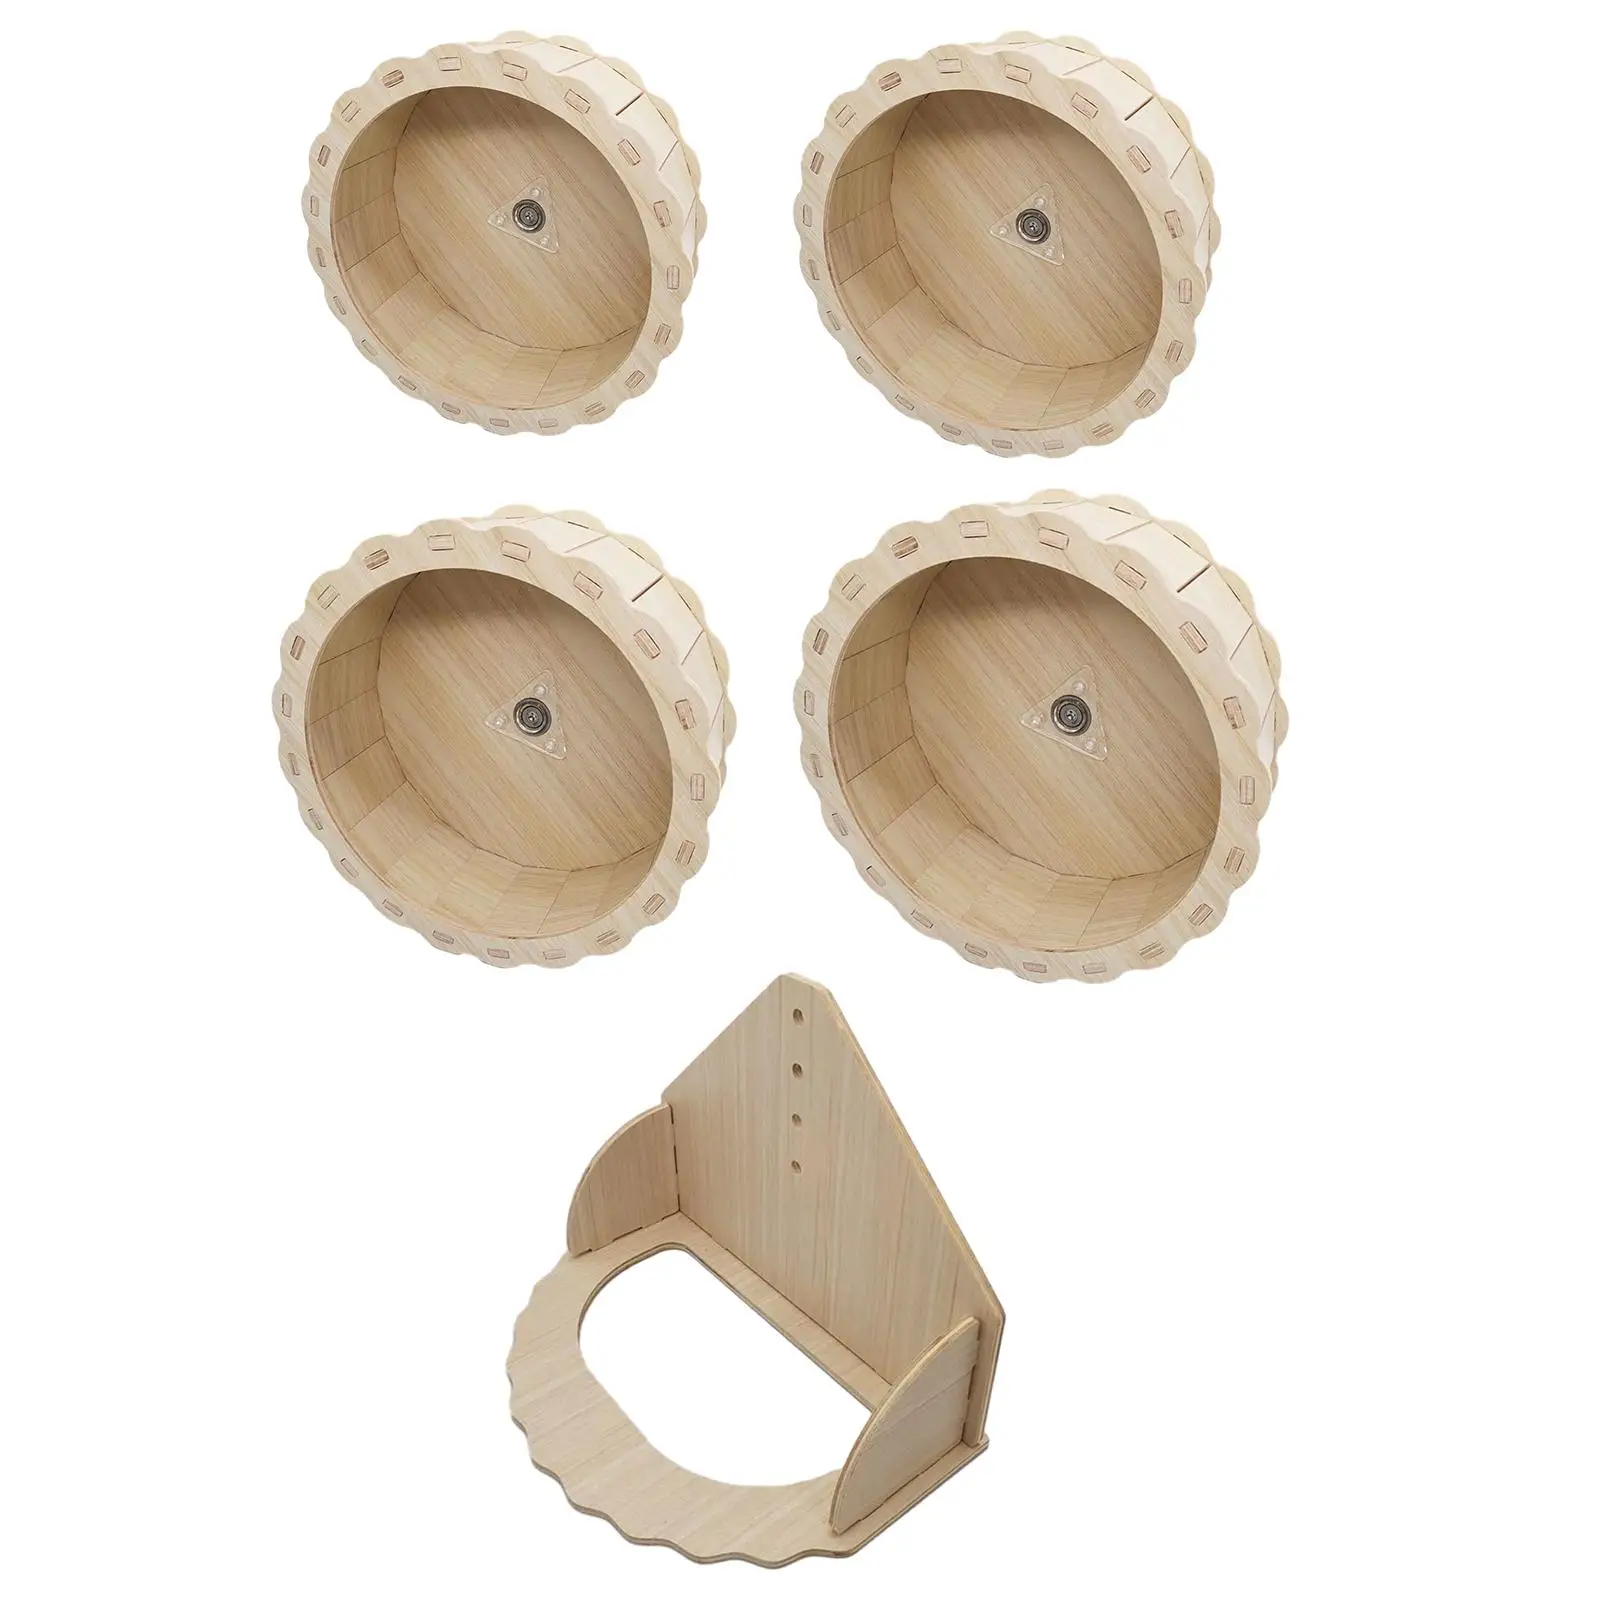 Hamster Wooden Running Wheel Silent Exercise Wheel Toy Small Pets Pet Supplies for Gerbils Other Small Animals Chinchilla Rat